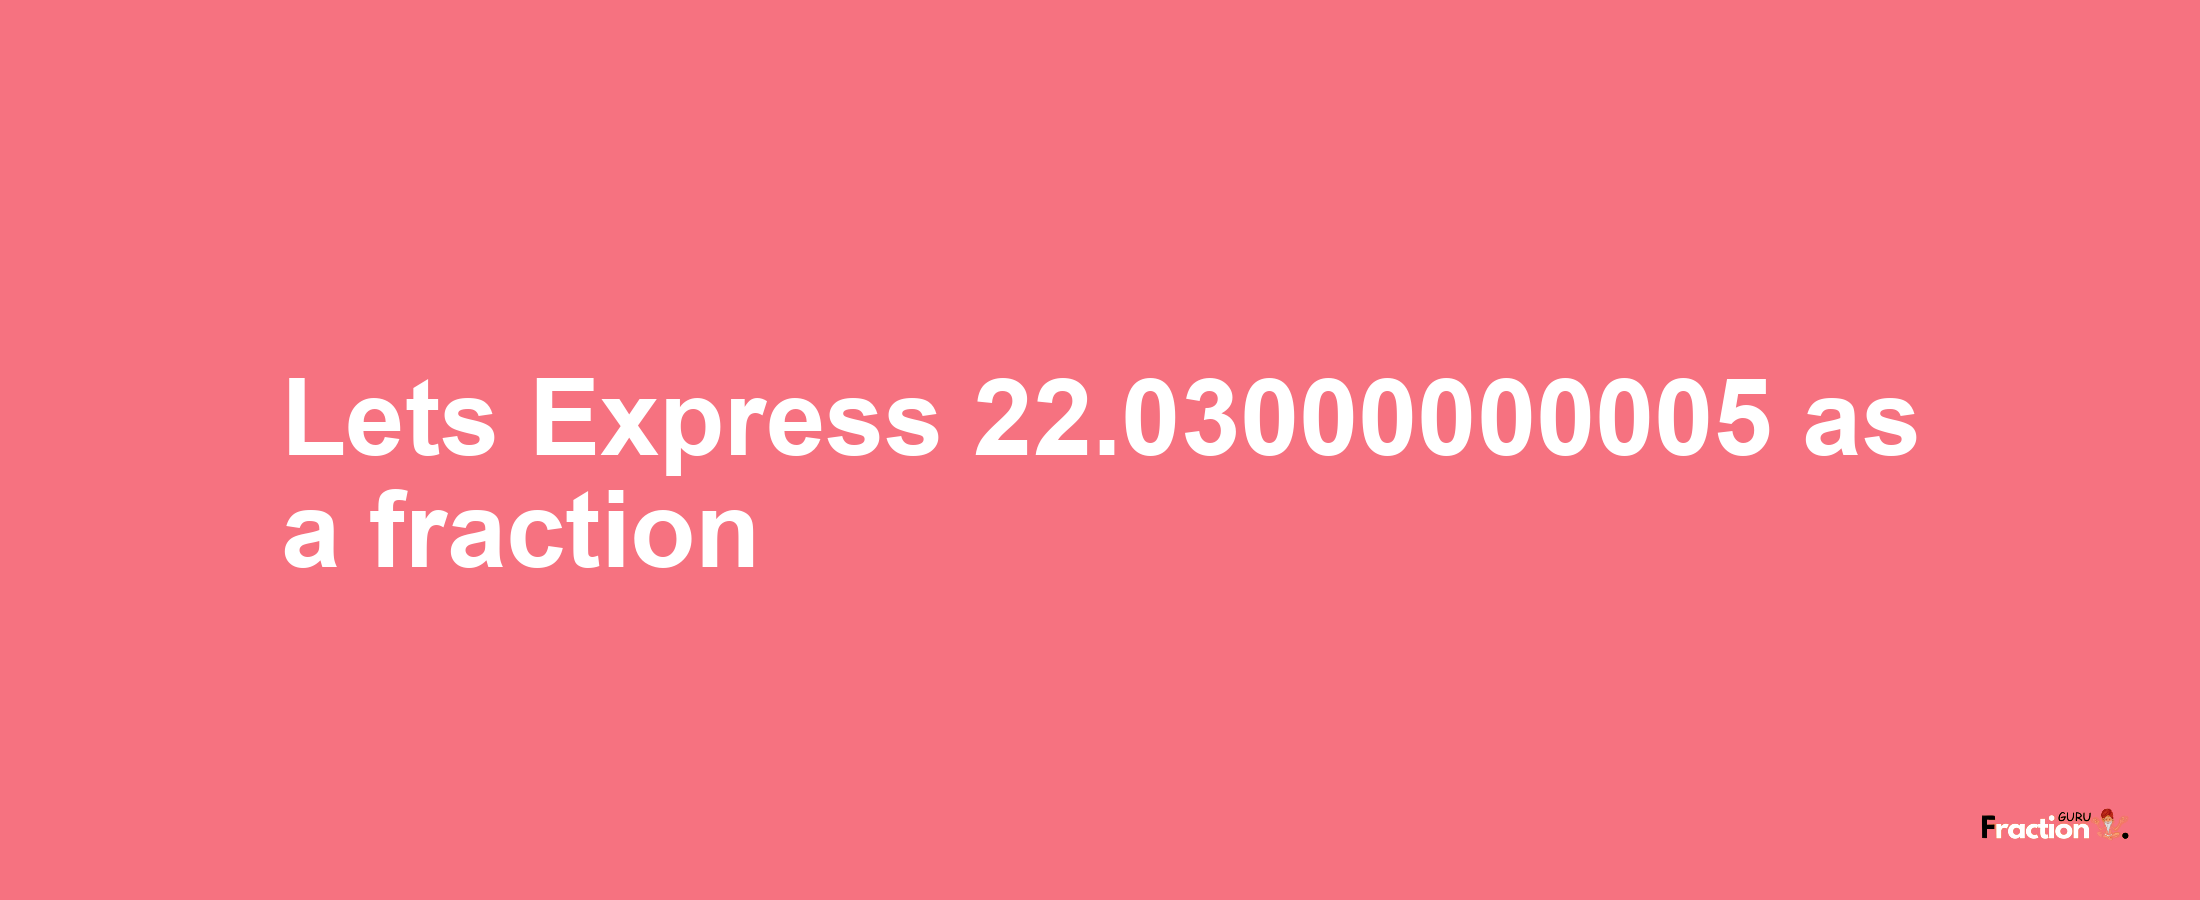 Lets Express 22.03000000005 as afraction